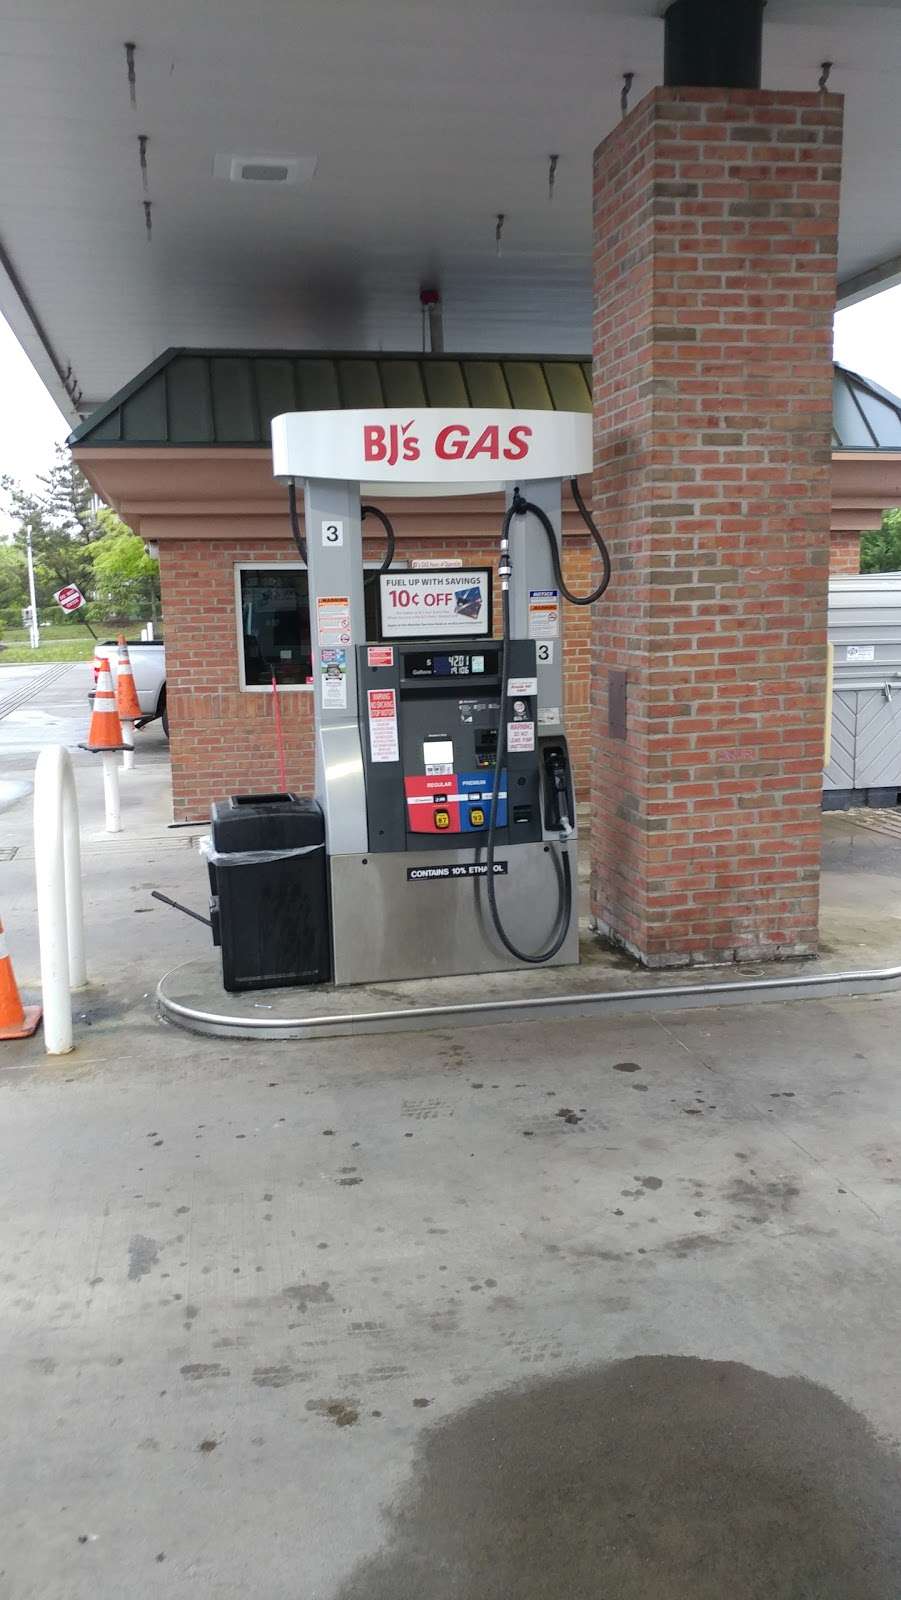 bj's gas station near me now